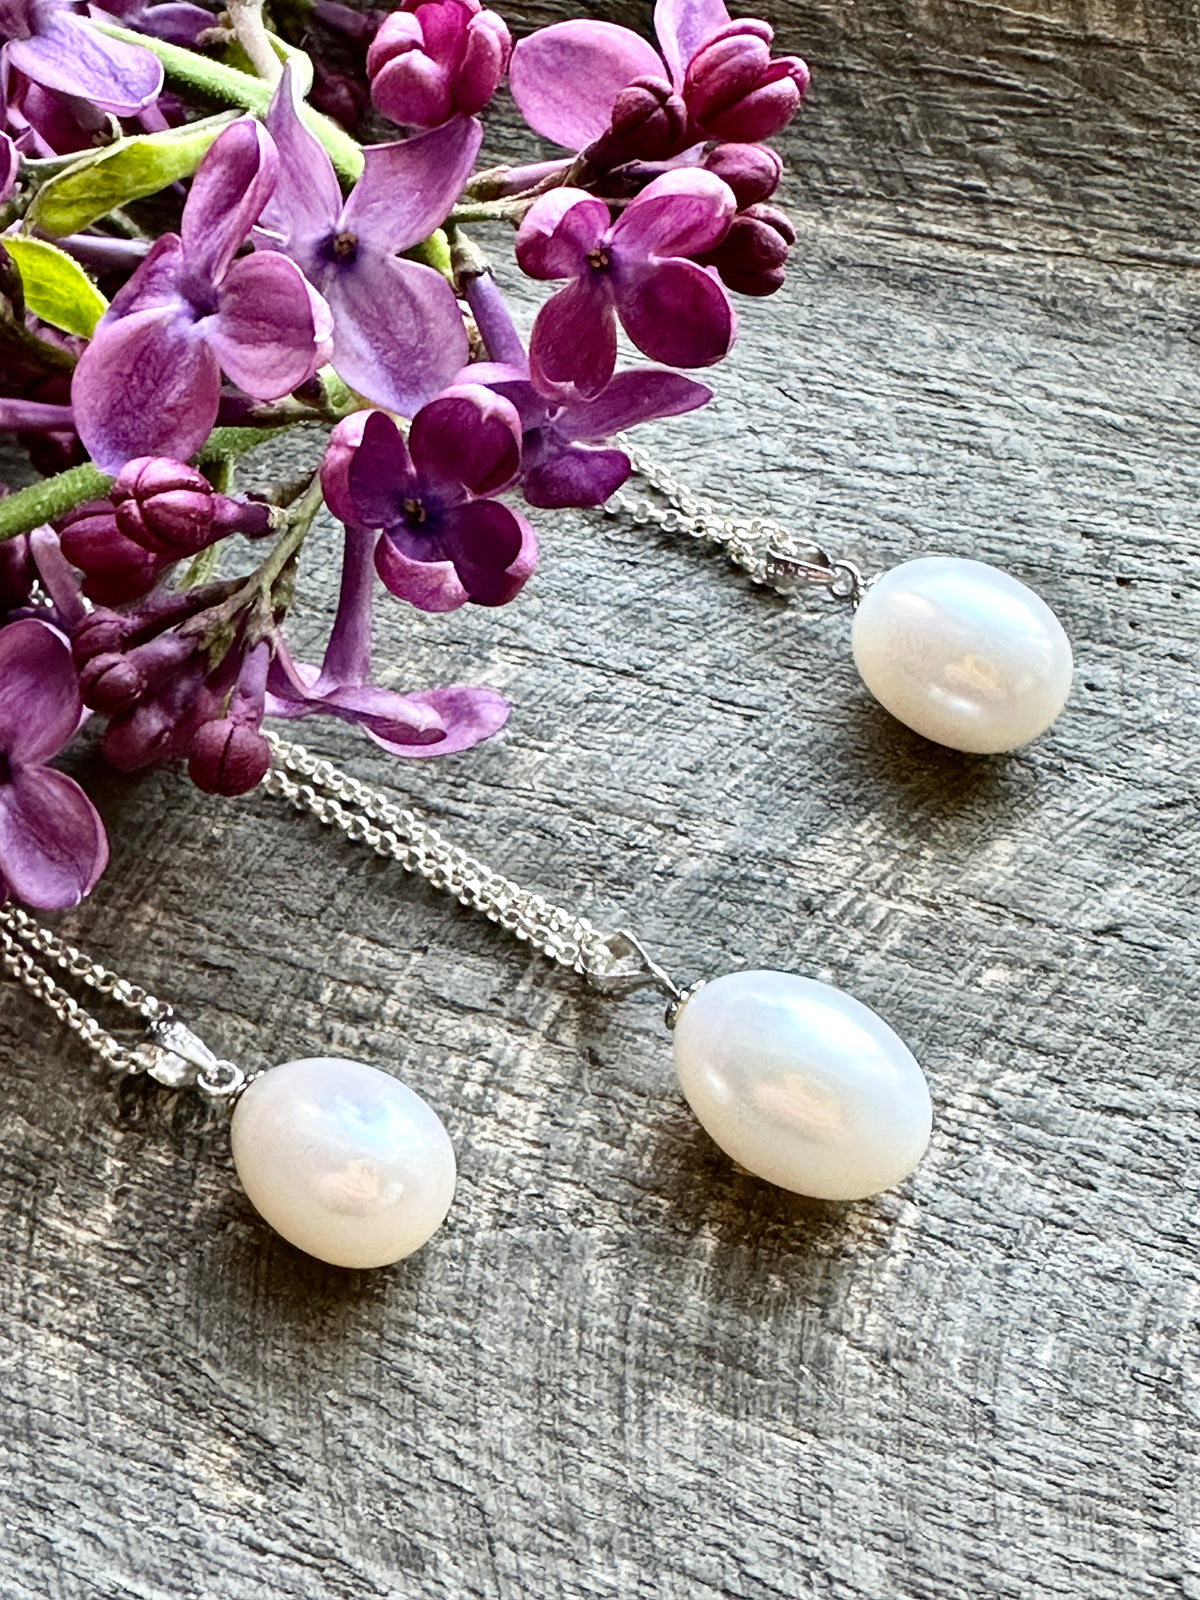 Ocean's Treasure: Freshwater Natural Pearl in Solid 925 Silver Pendant Necklace